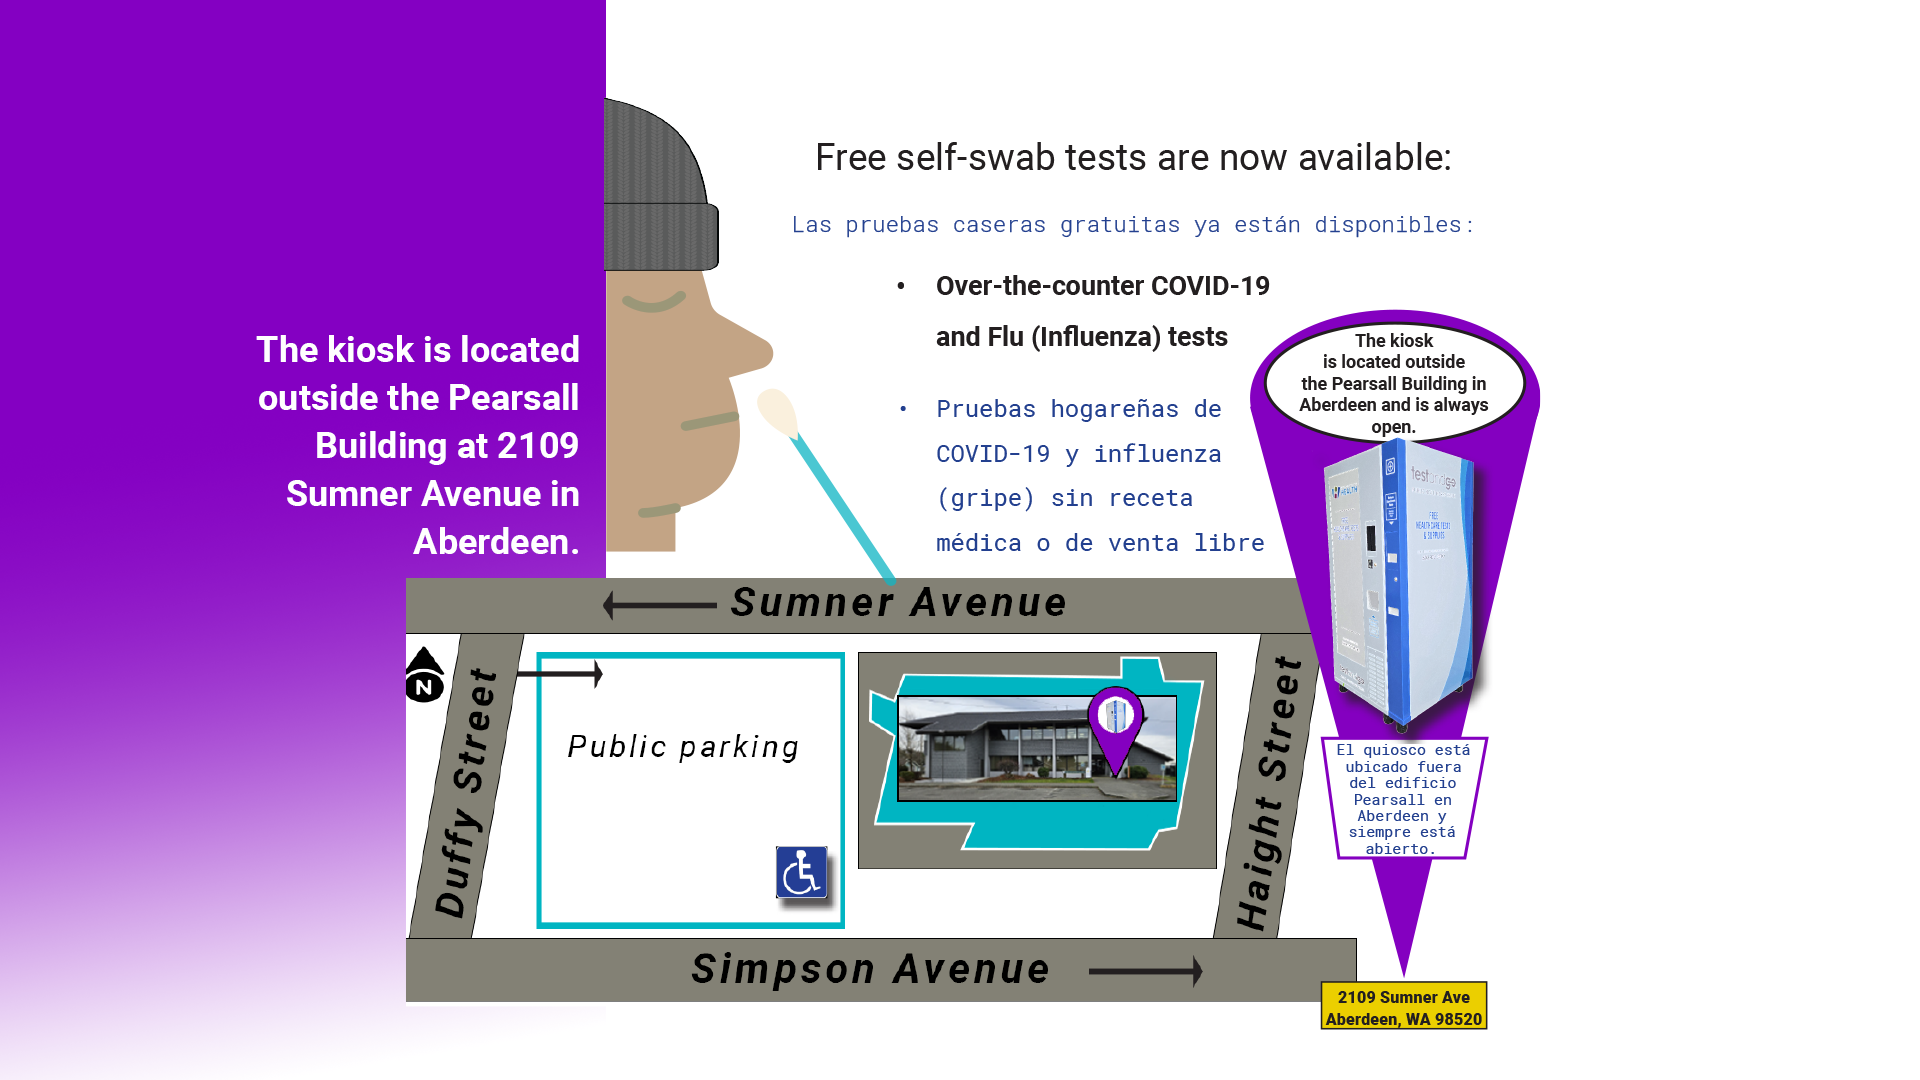 Learn more about the free self-test kiosk